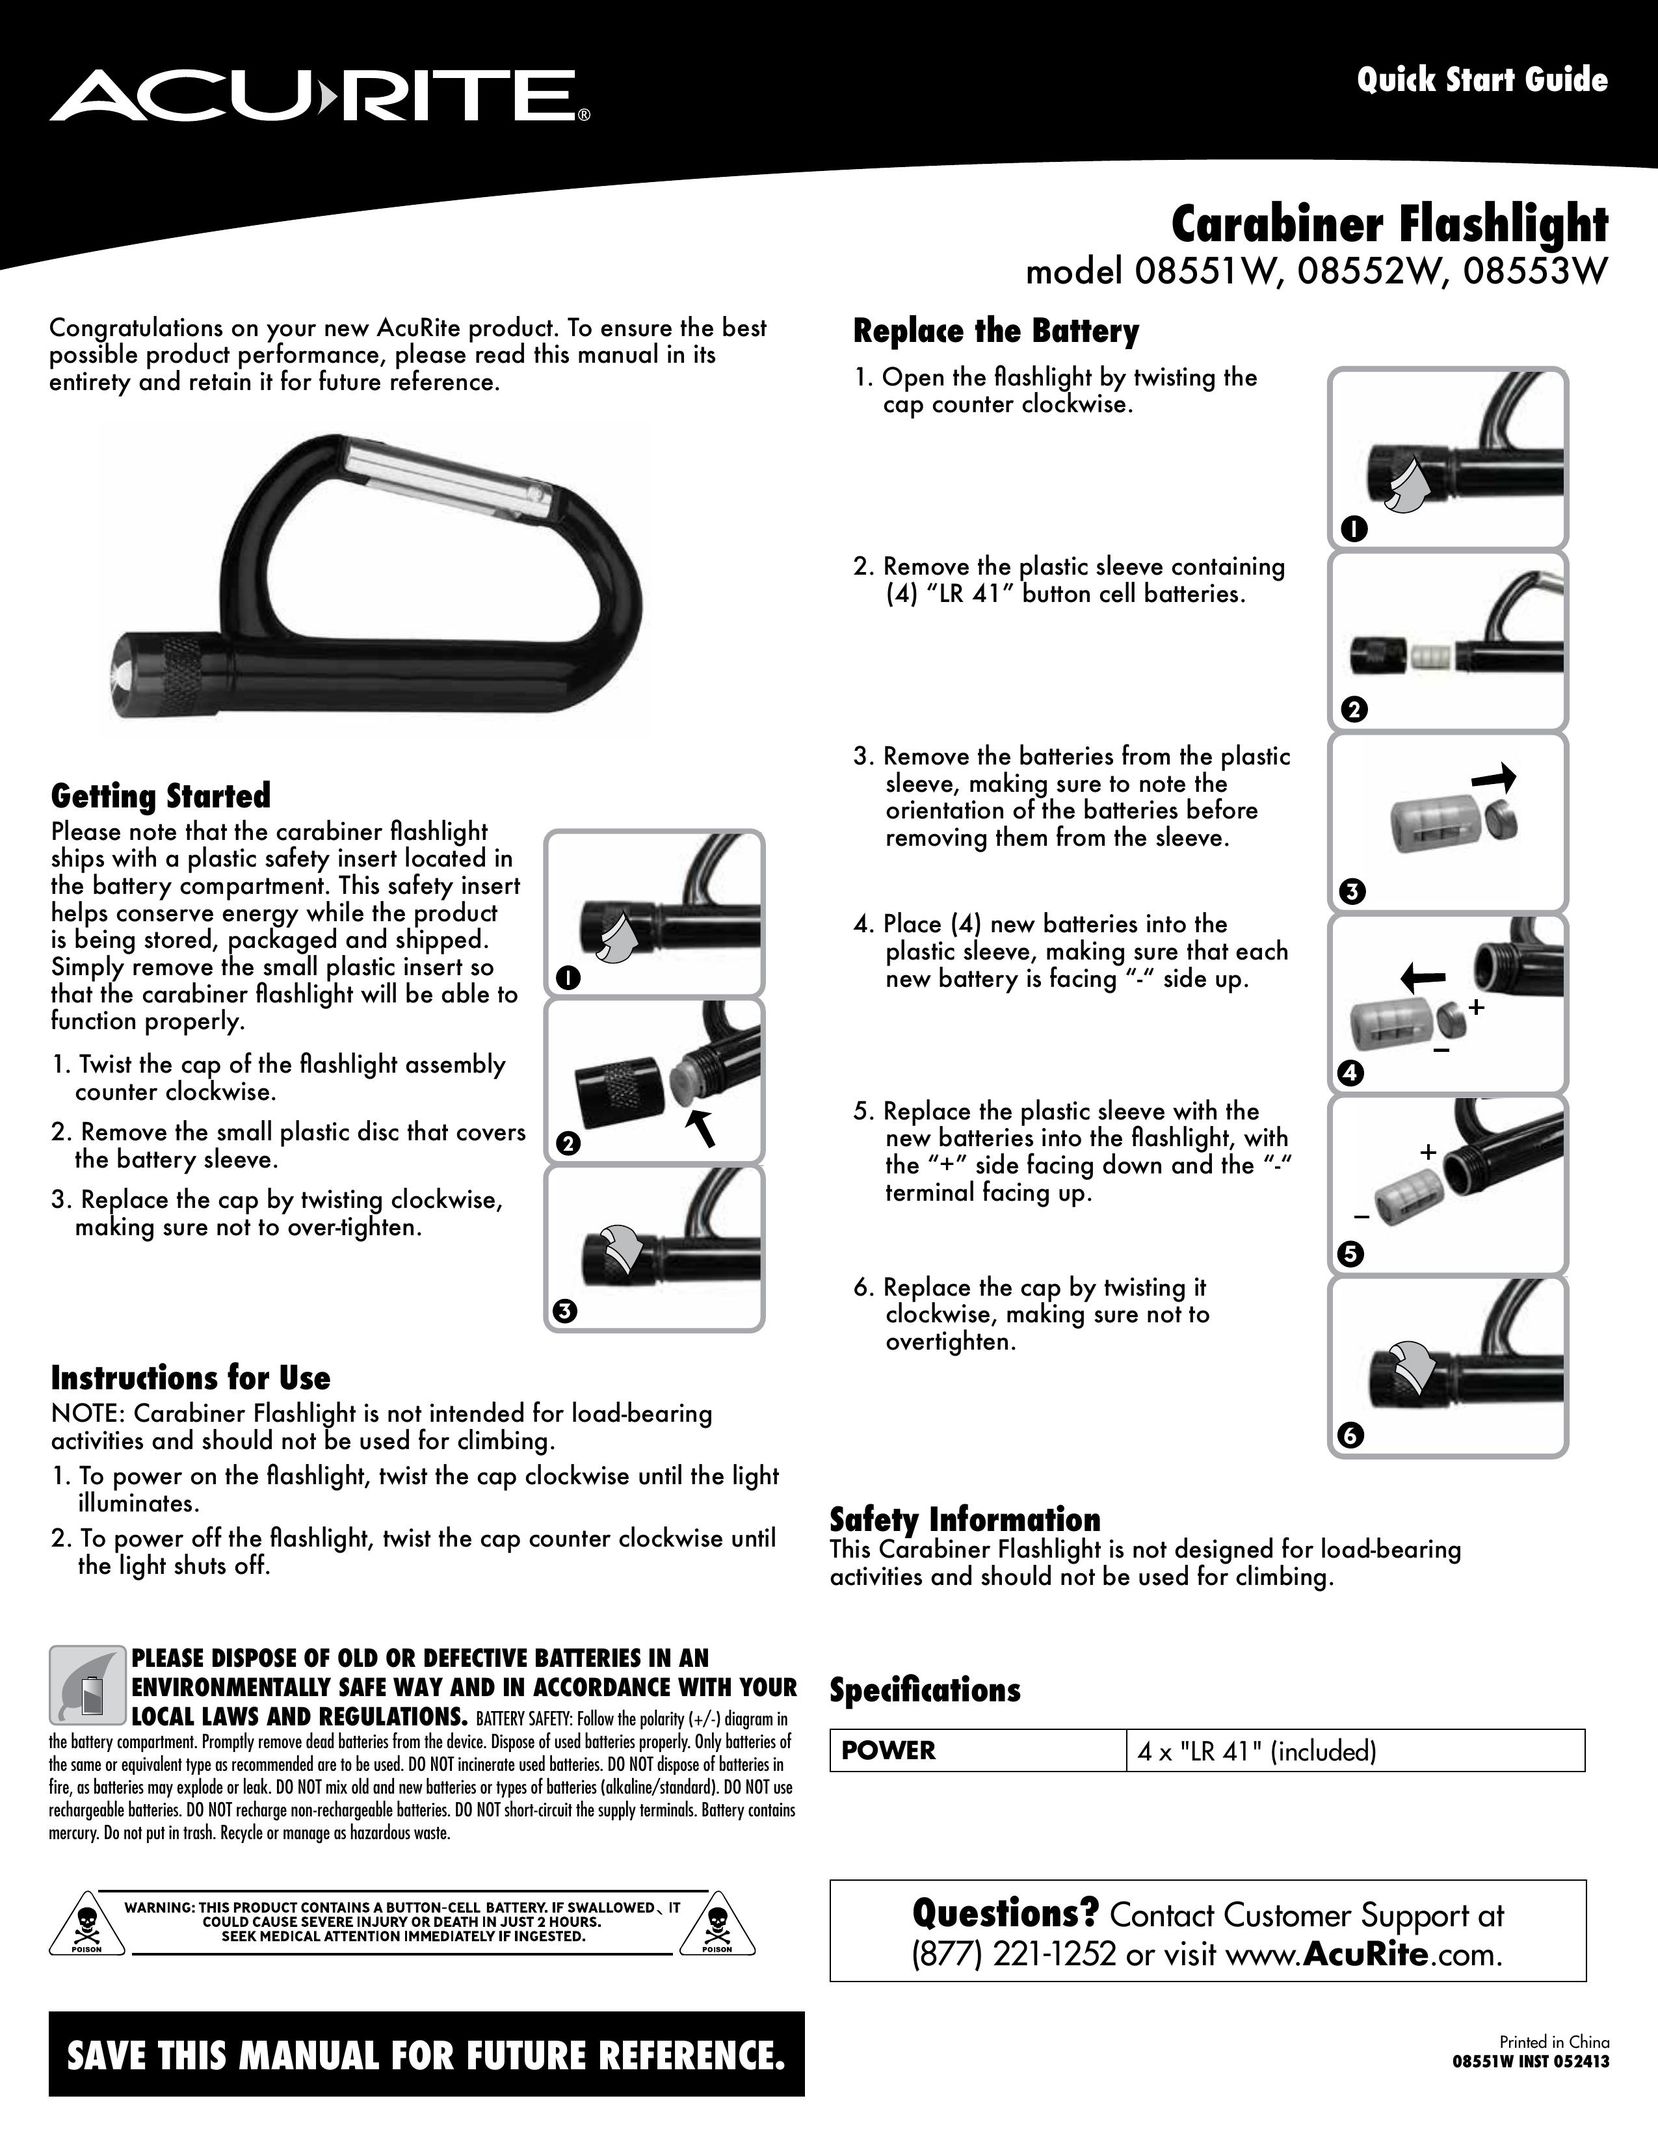 Acu-Rite 08551W Home Safety Product User Manual